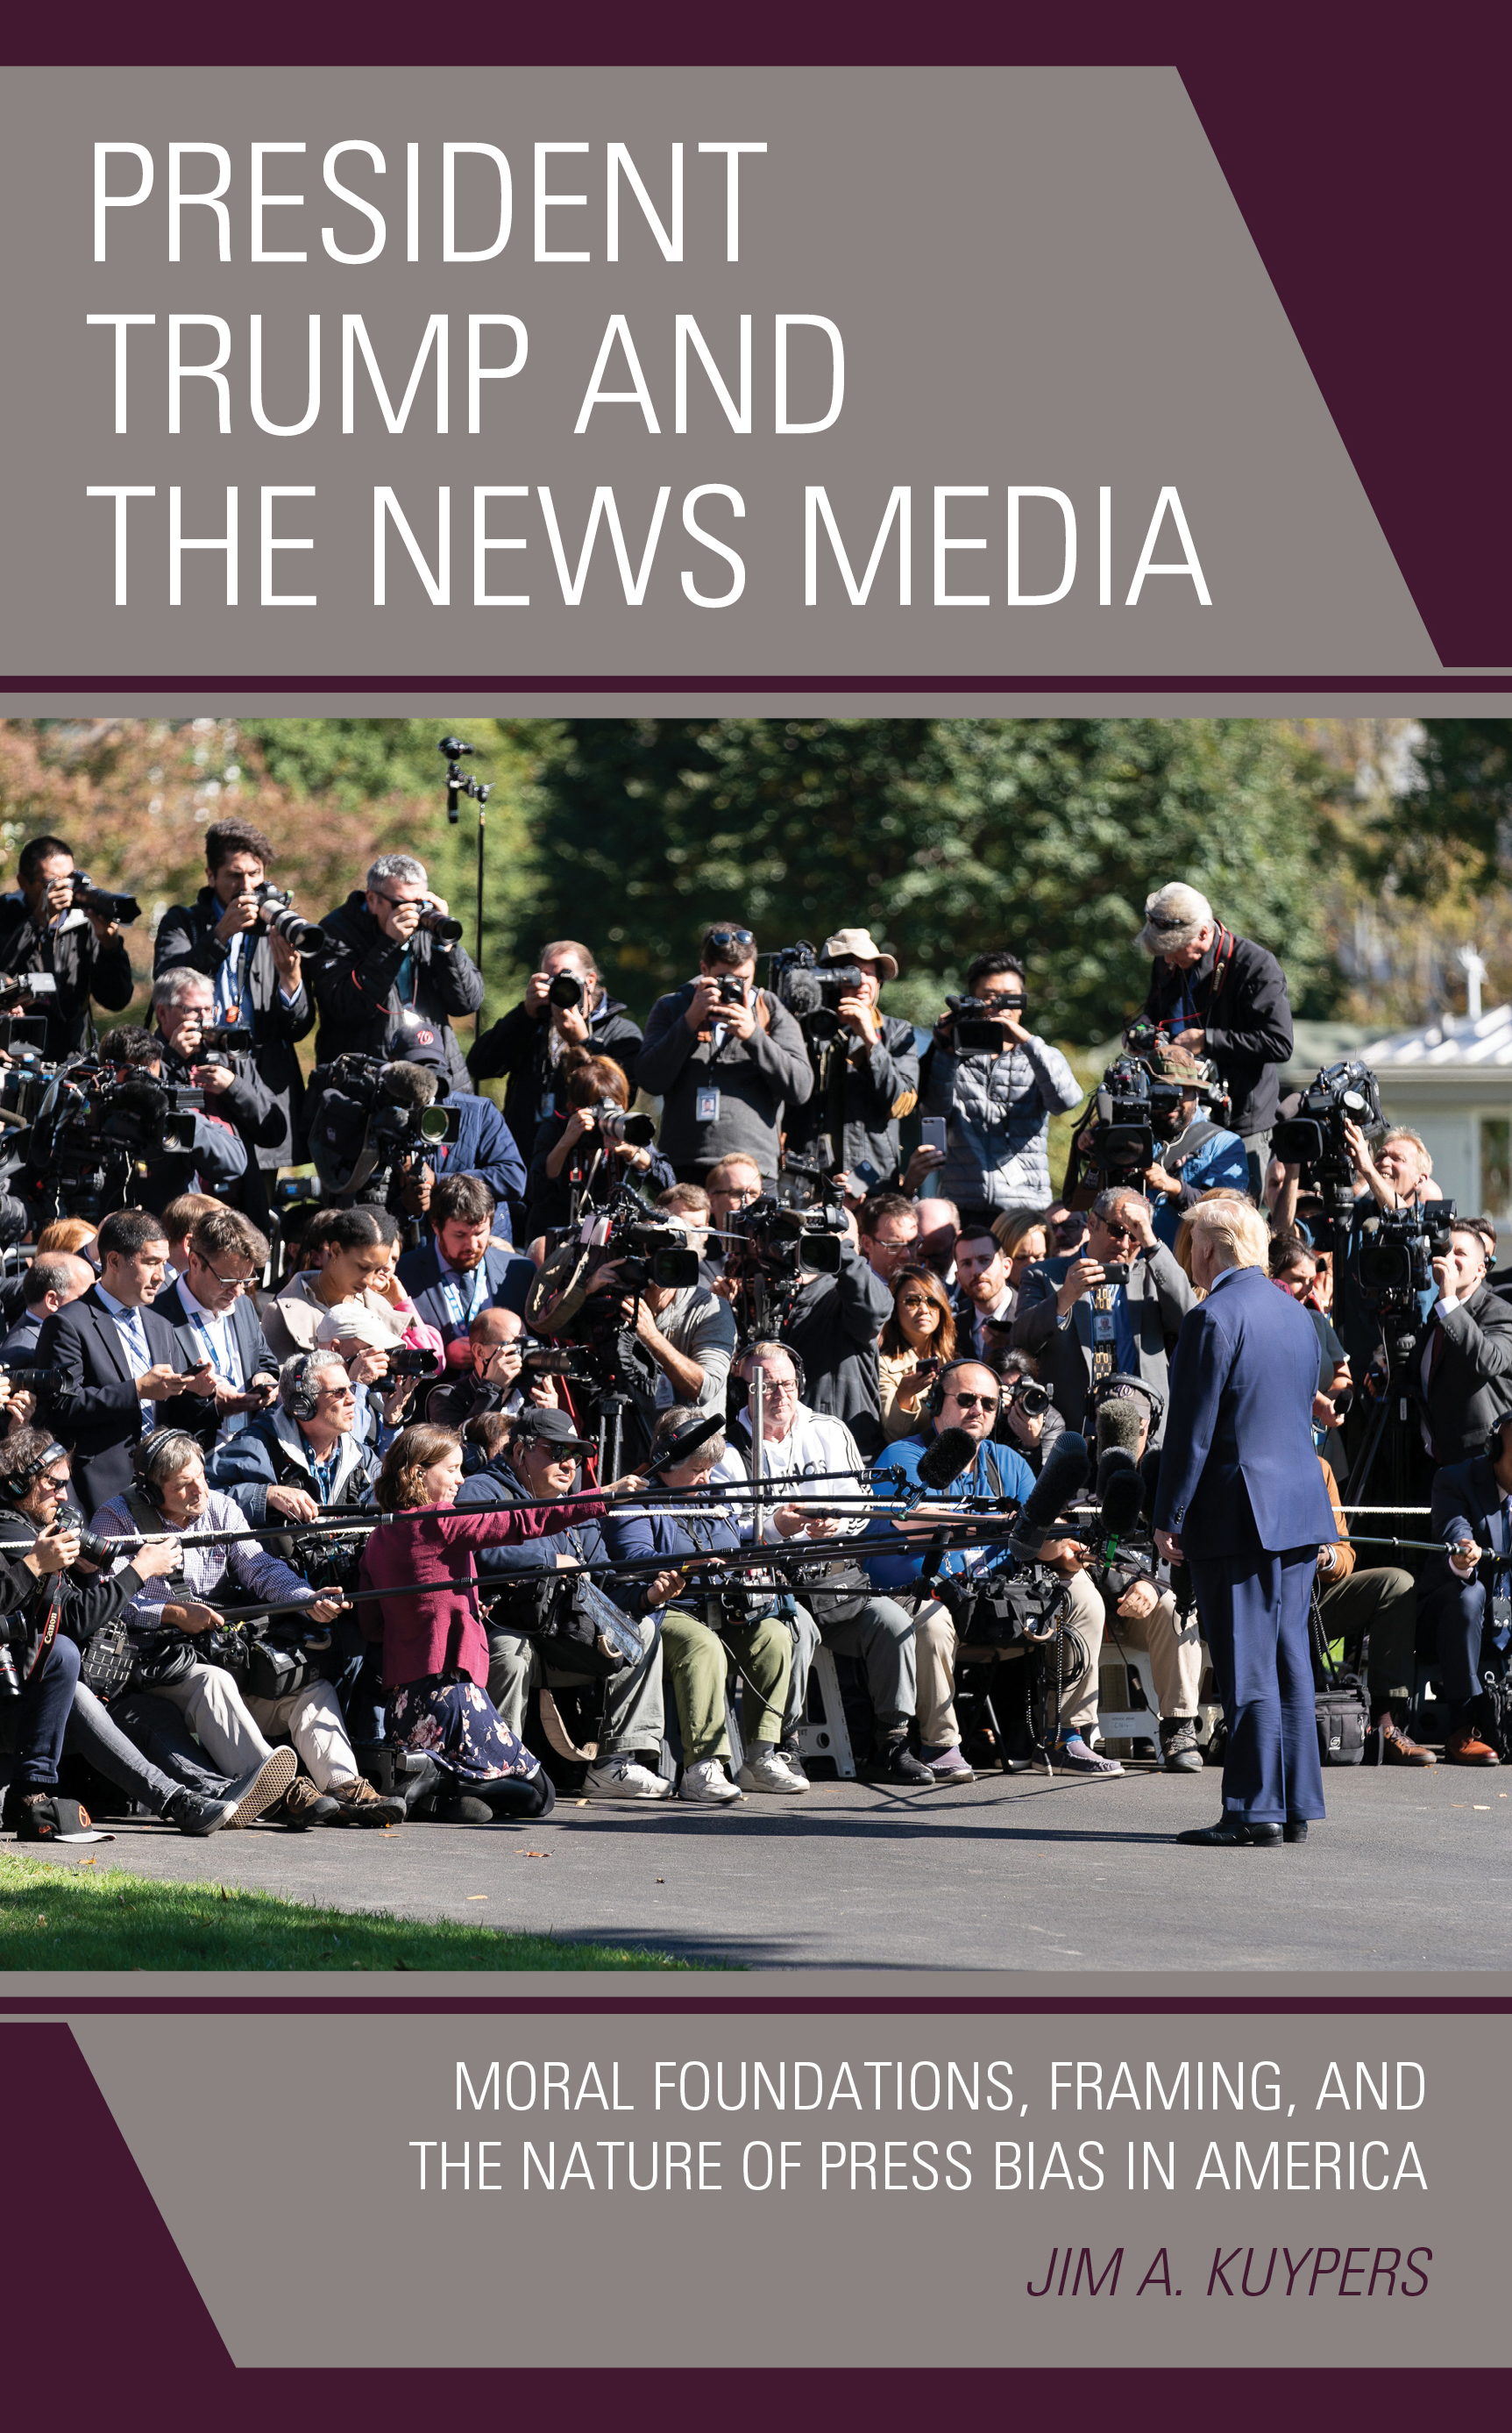 President Trump and the News Media: Moral Foundations, Framing, and the Nature of Press Bias in America